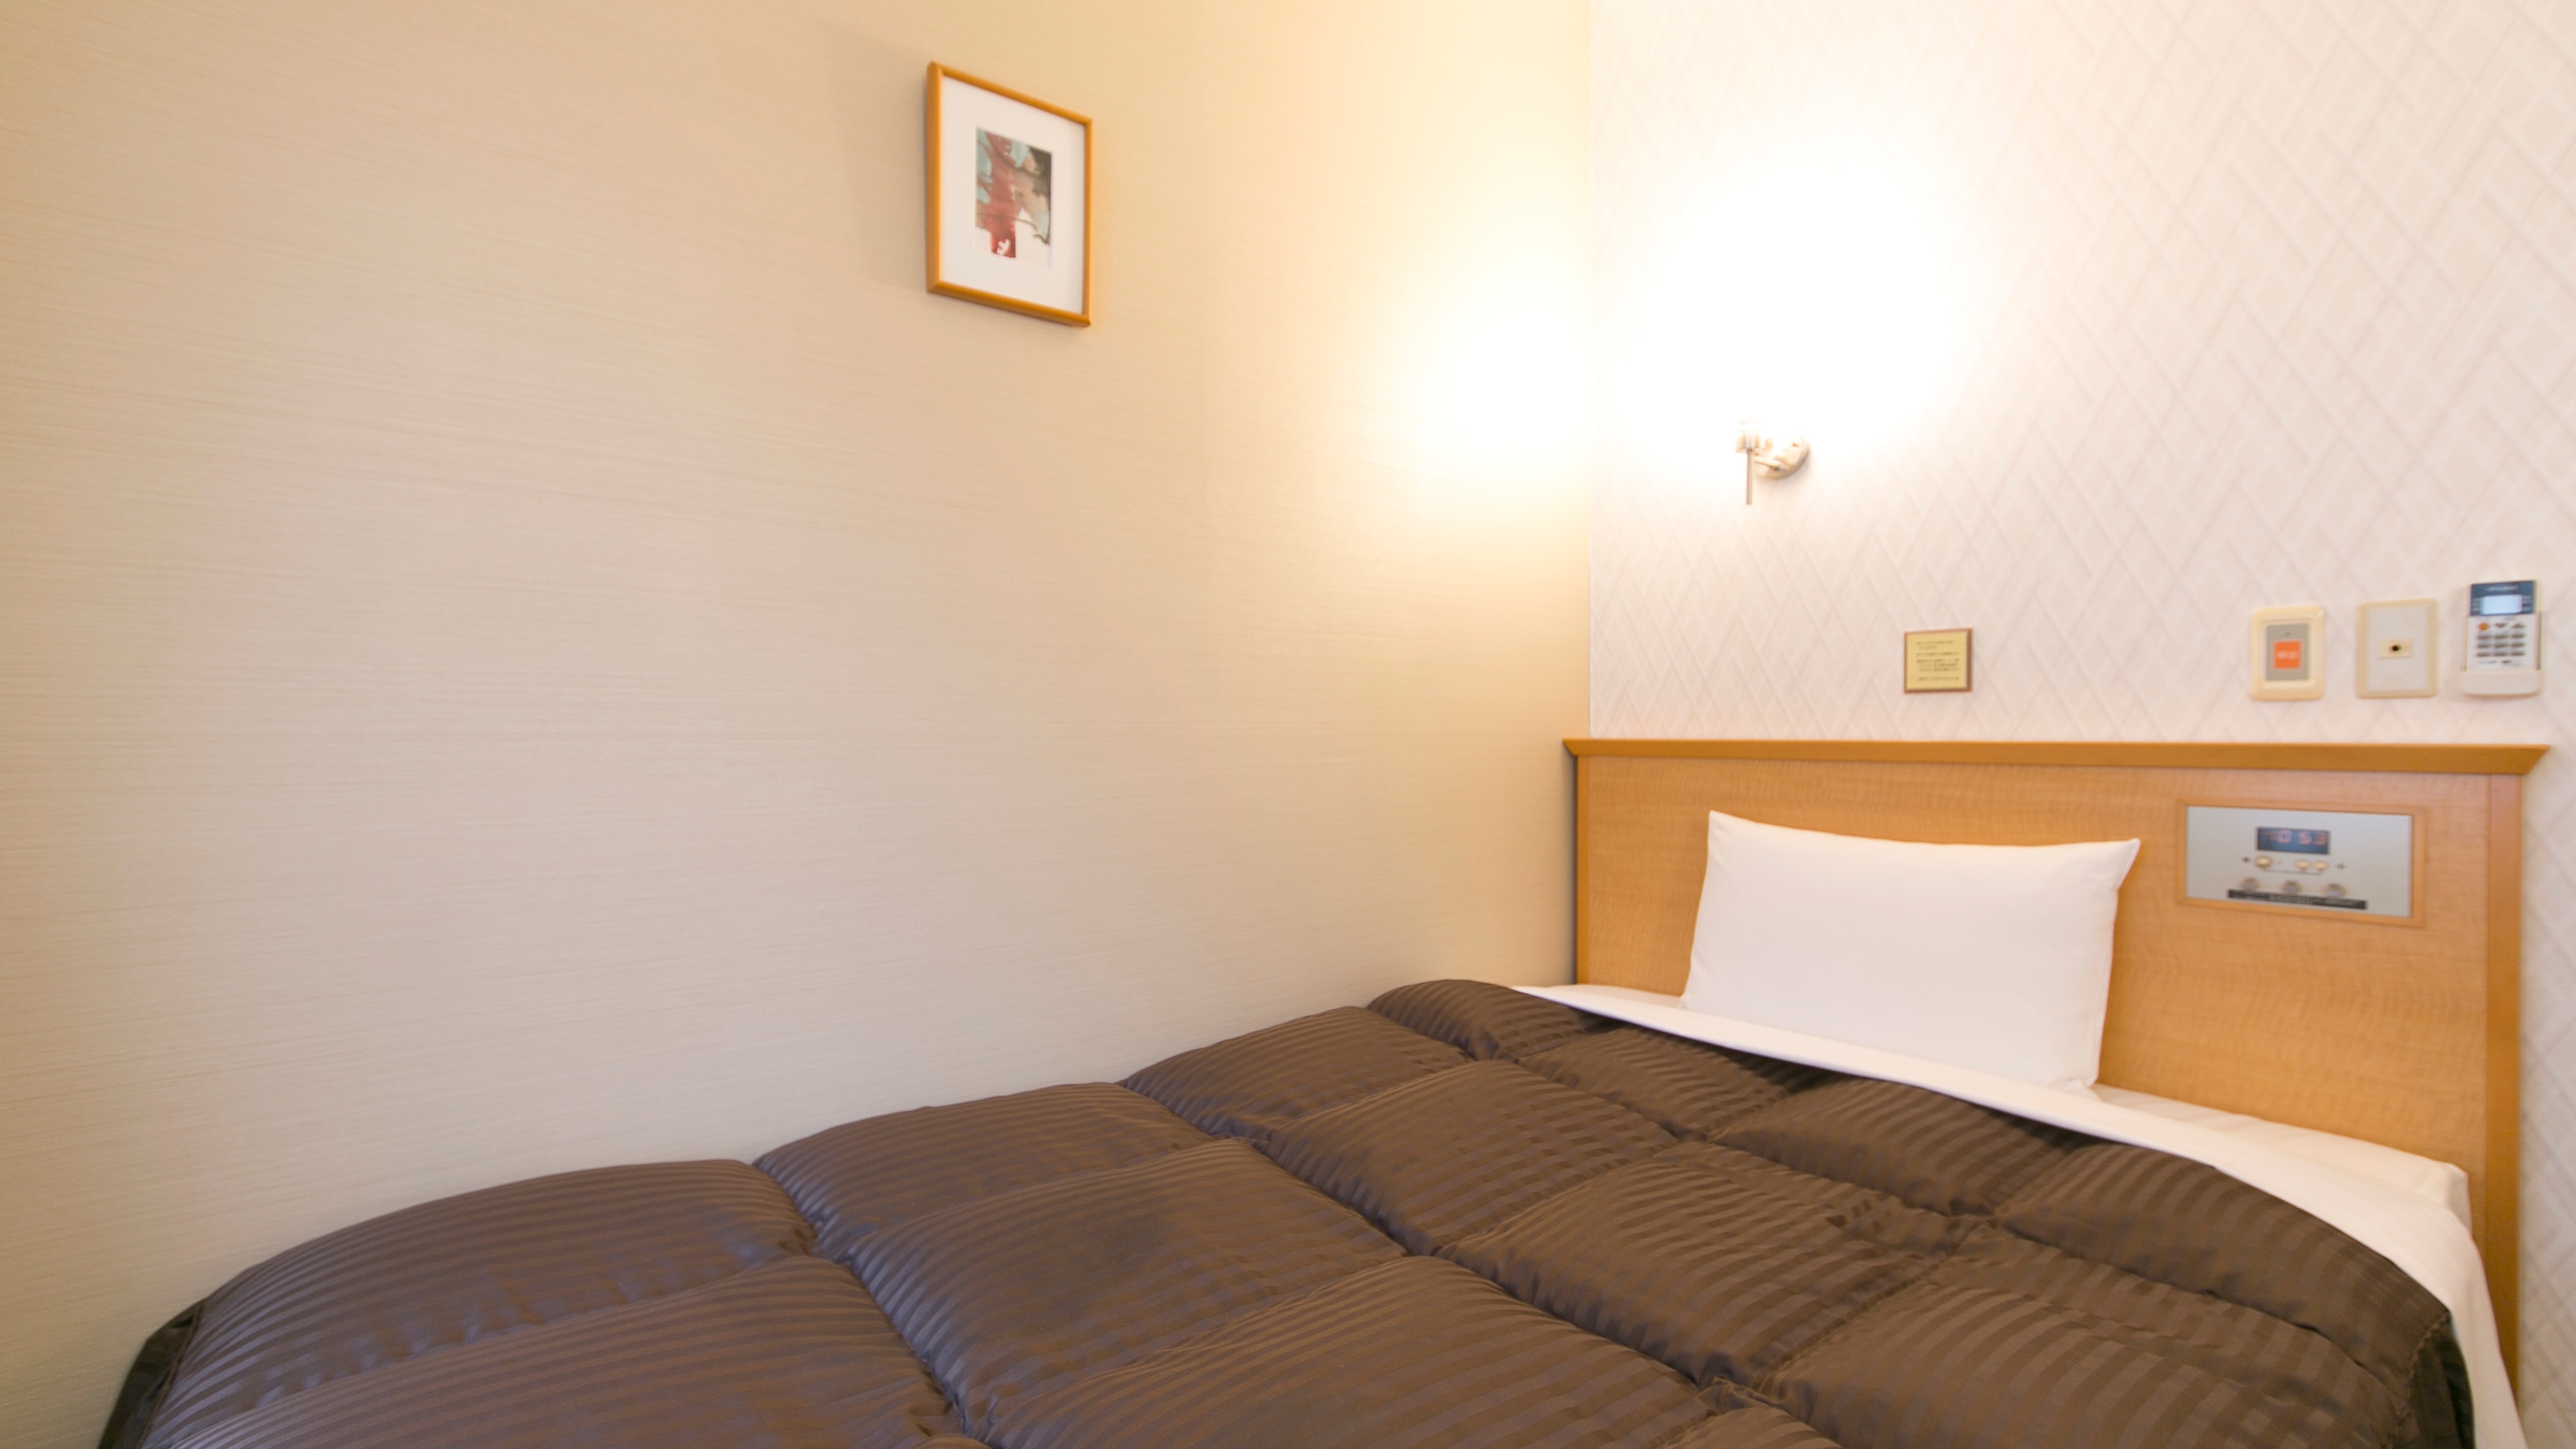 All rooms are equipped with semi-double beds (120 & times; 190)